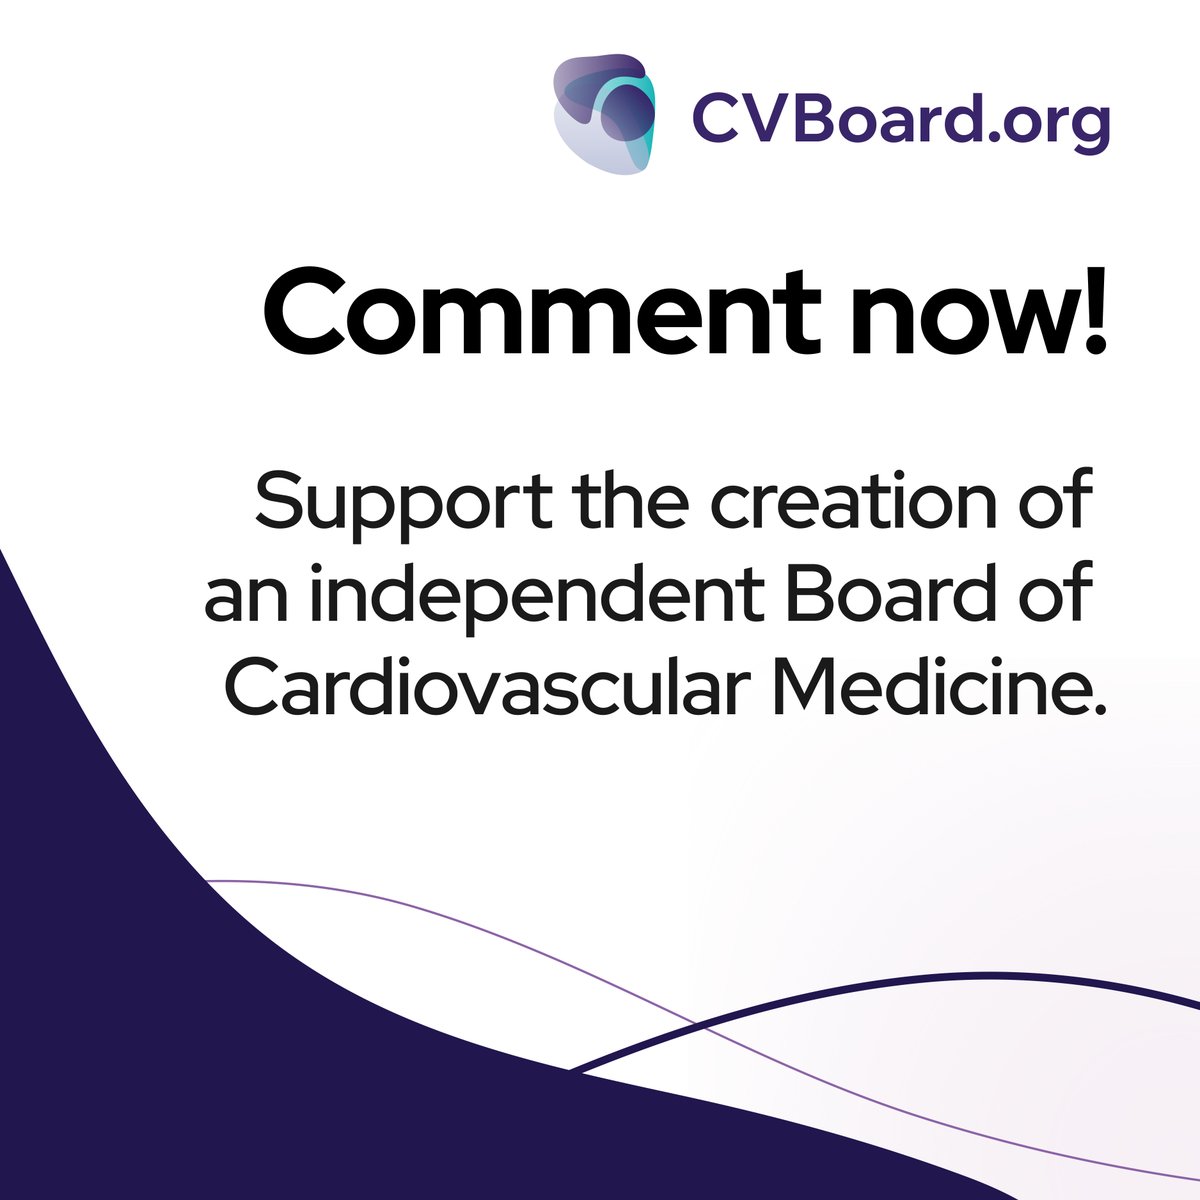 The comment period for the proposed Board of Cardiovascular Medicine is open. The ABMS is interested in hearing from cardiologists as to how a separate, independent CV Board would benefit both clinicians & patients. Make your voice heard by July 24: CVBoard.org/get-involved/